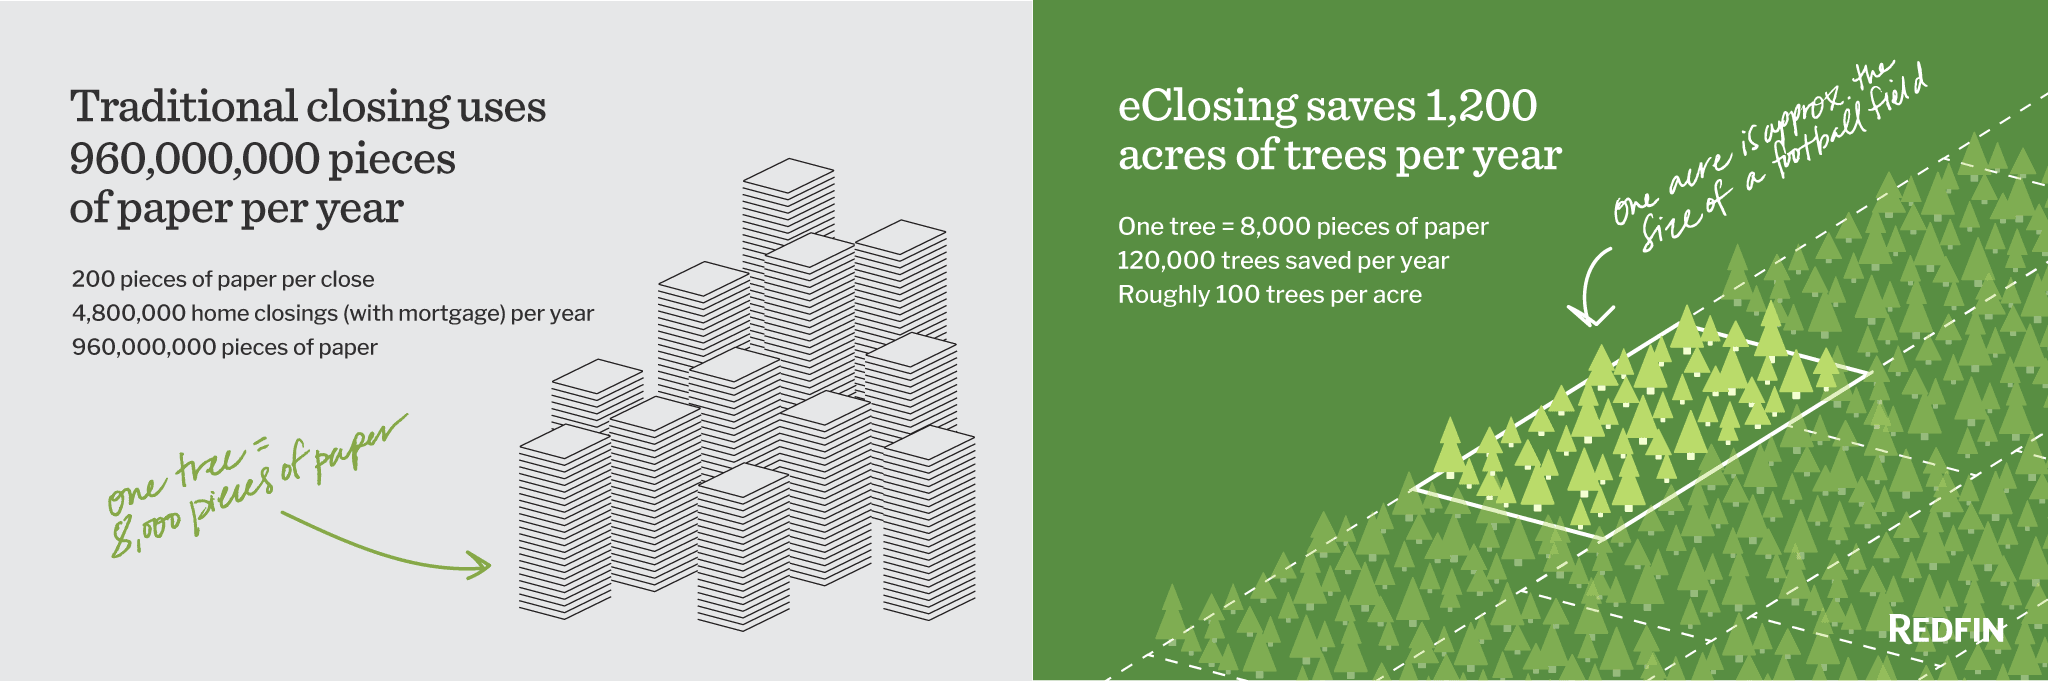 How many trees are saved with fully digital closings?